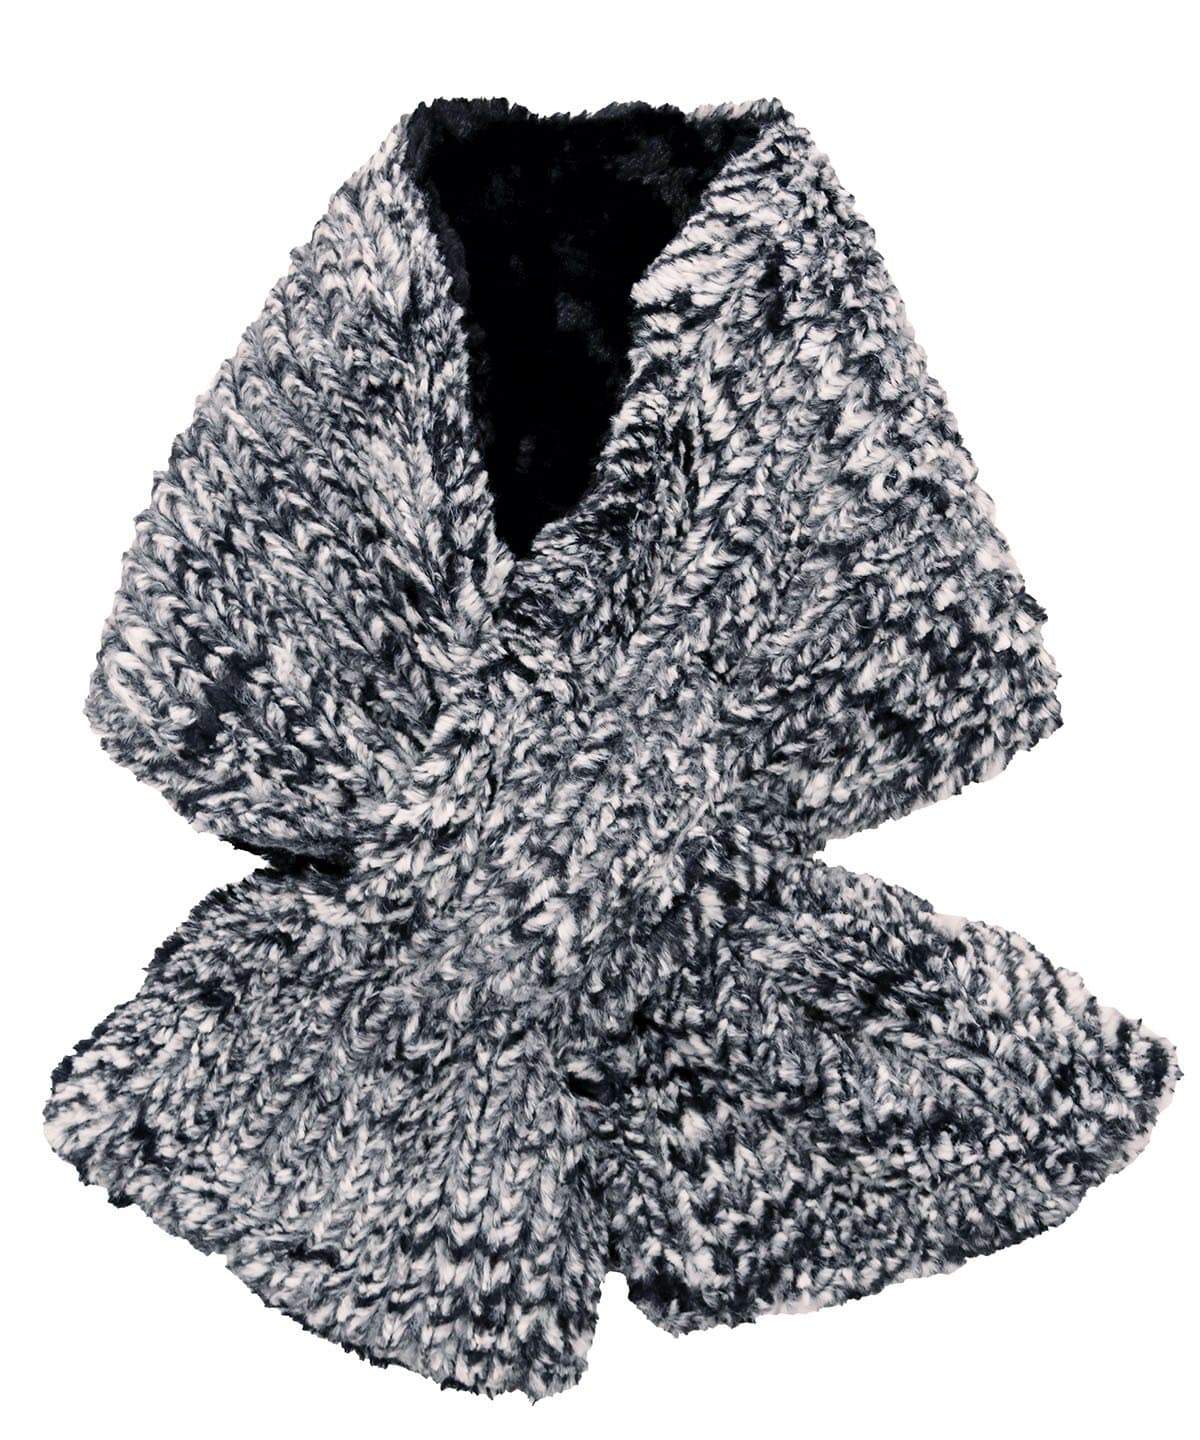 Pull-Thru Scarf - Cozy Cable Faux Fur